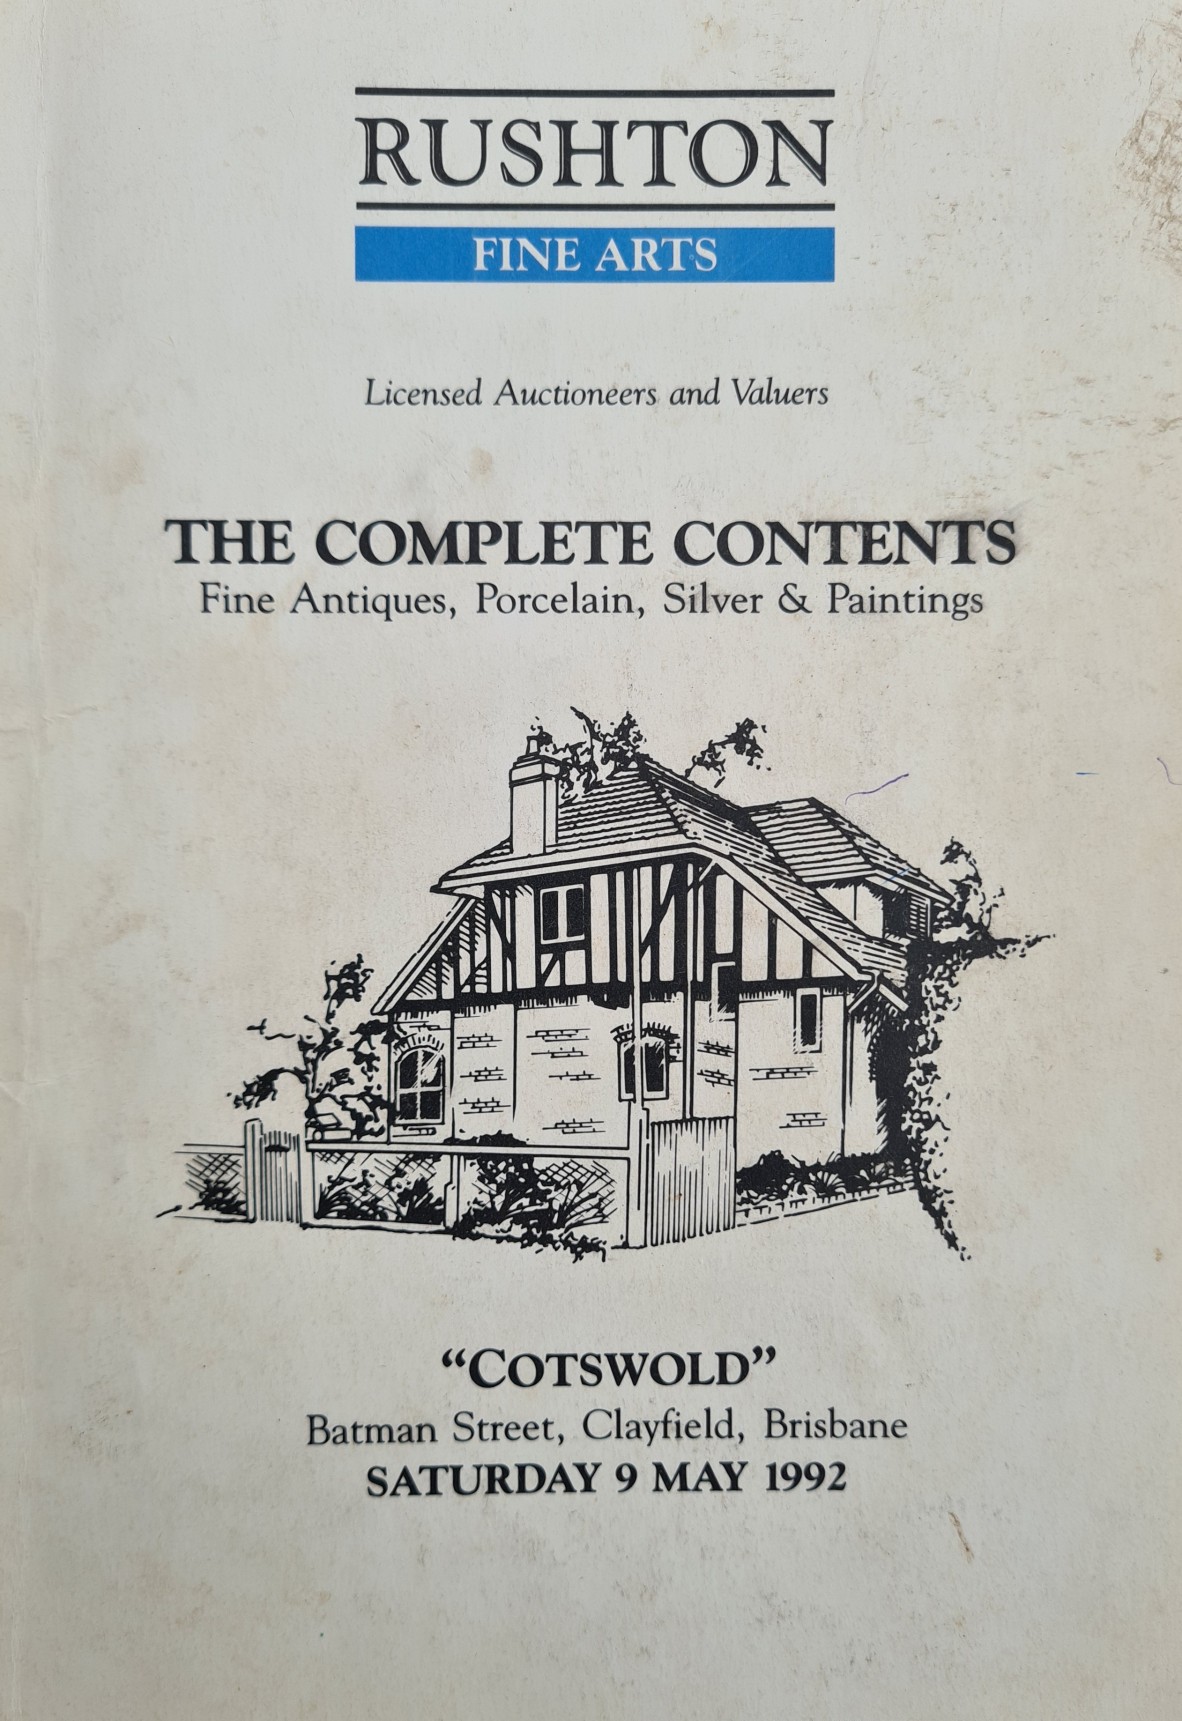 Auction of contents of Cotswold catalogue, 1992, donated to State Library's collection.